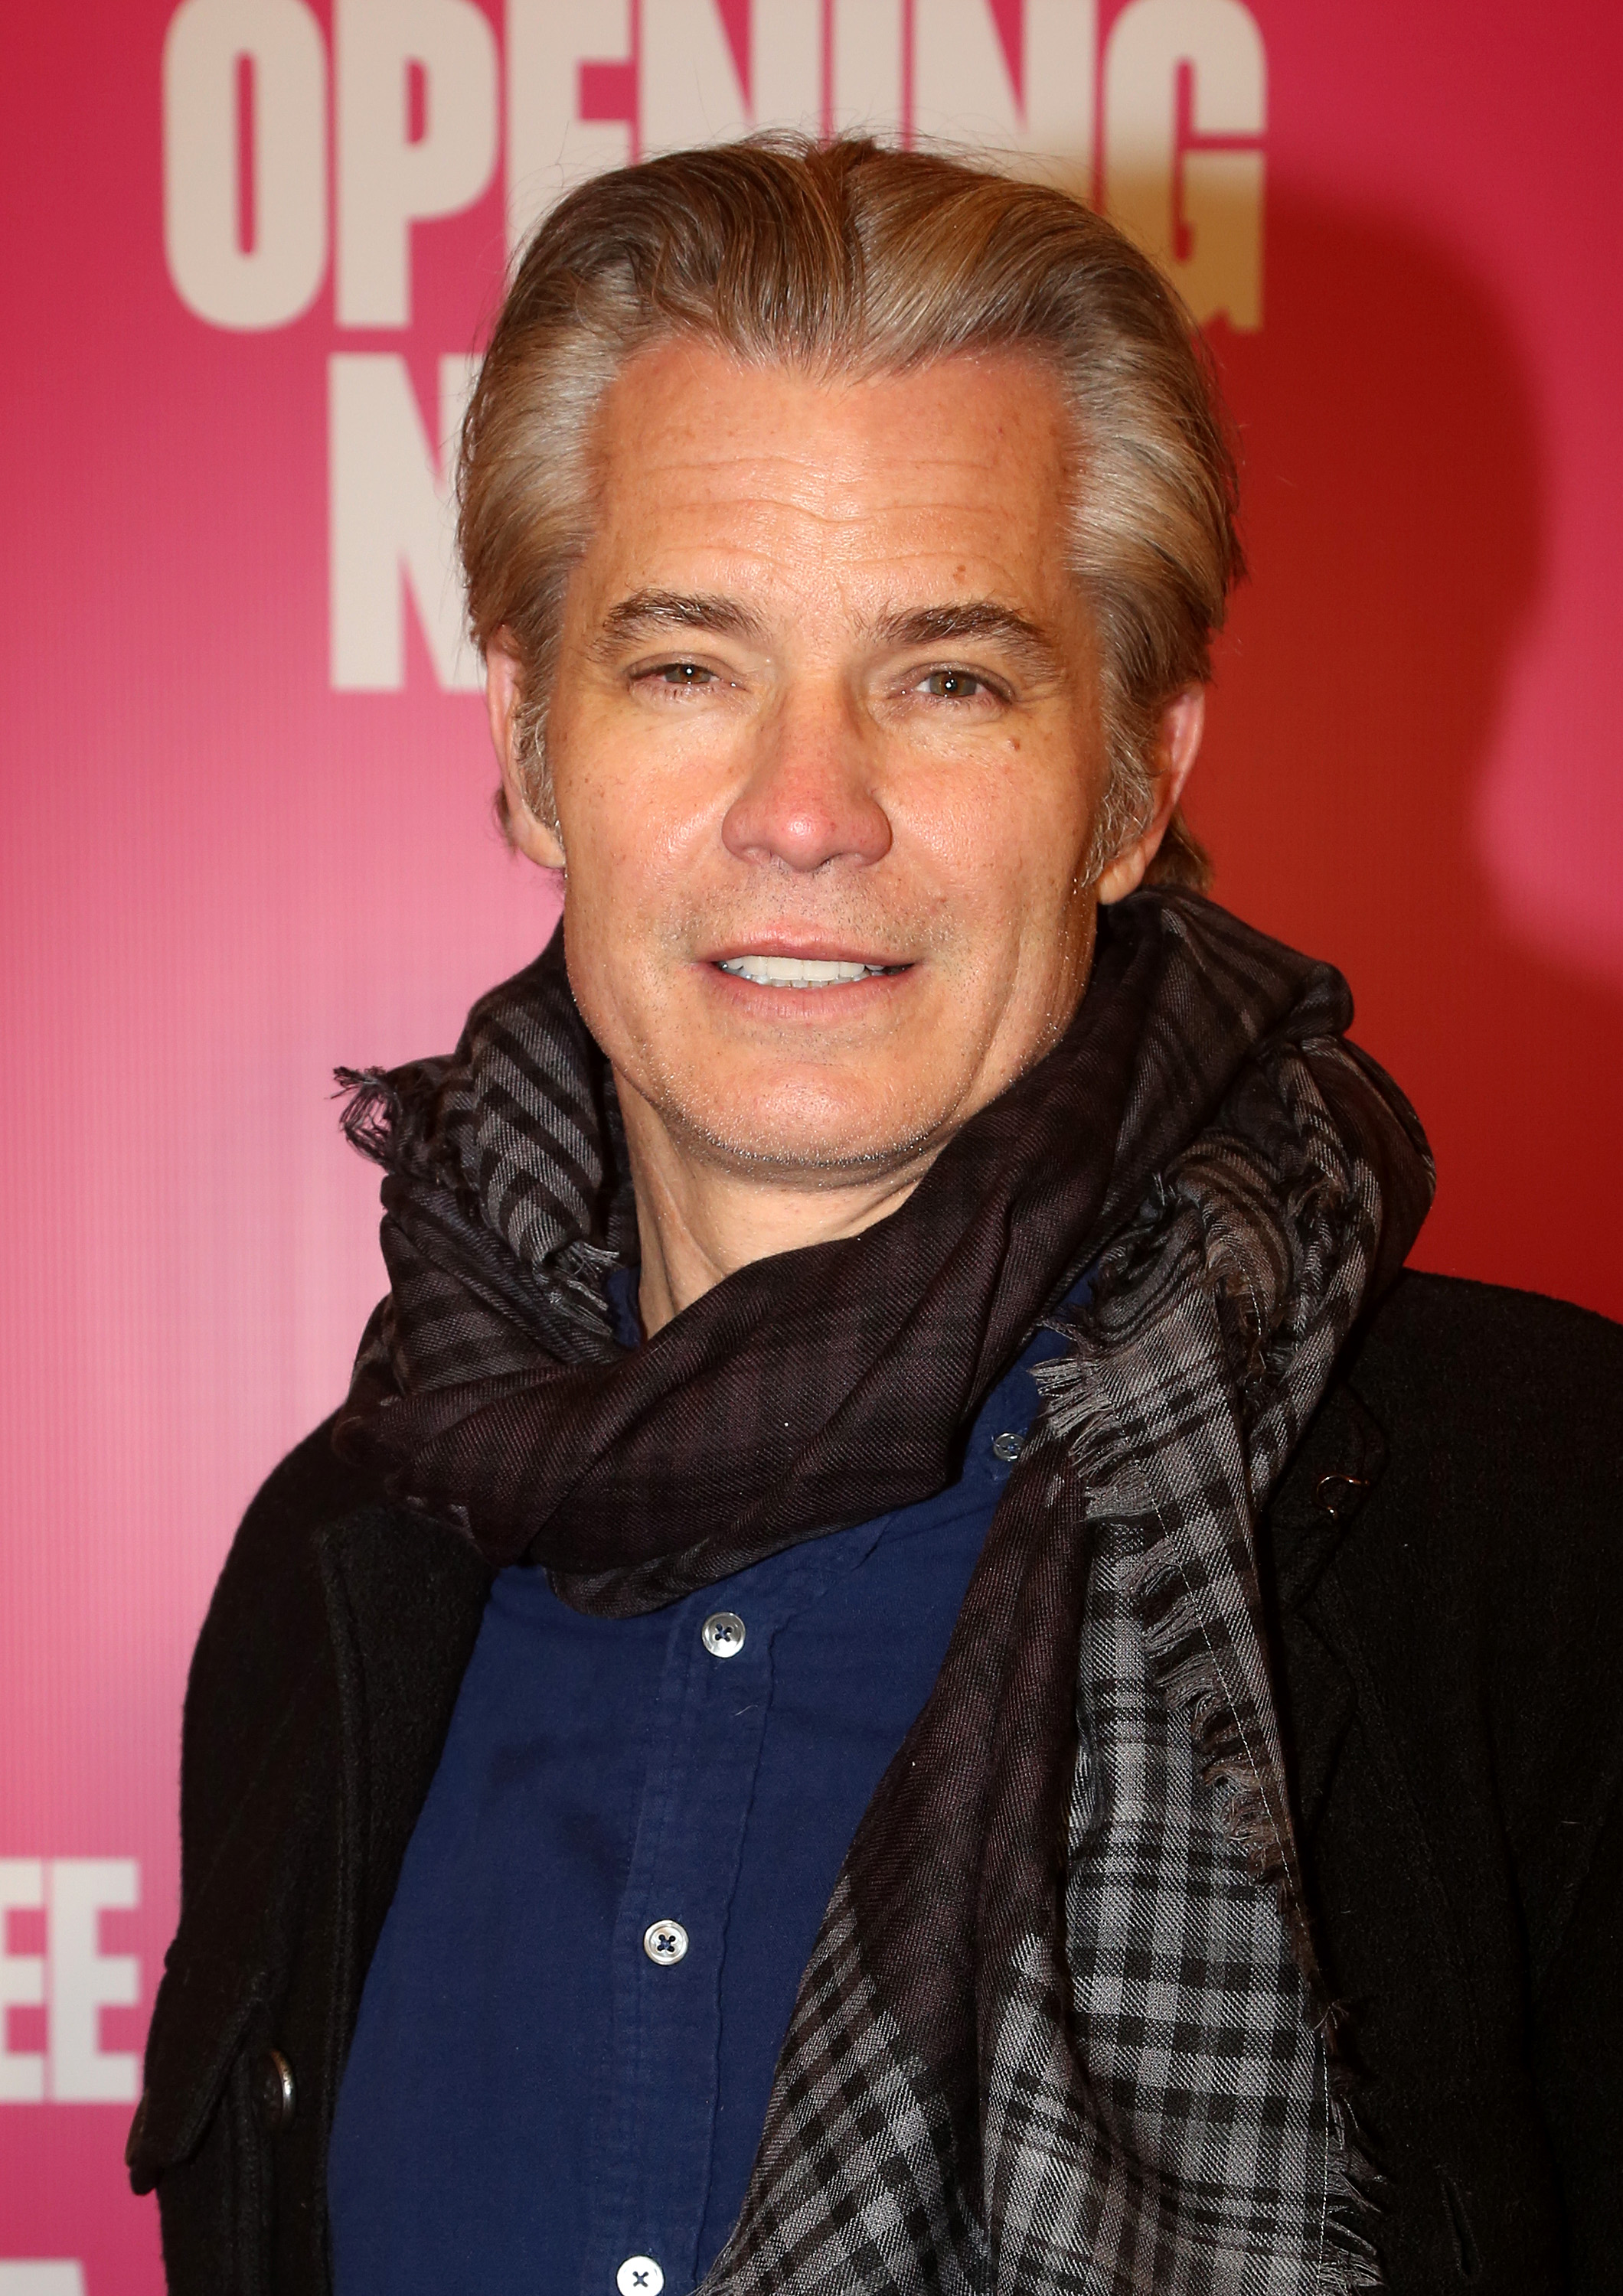 Timothy Olyphant at the opening night of the new play "Ain't No Mo'" on Broadway on December 1, 2022, in New York City. | Source: Getty Images